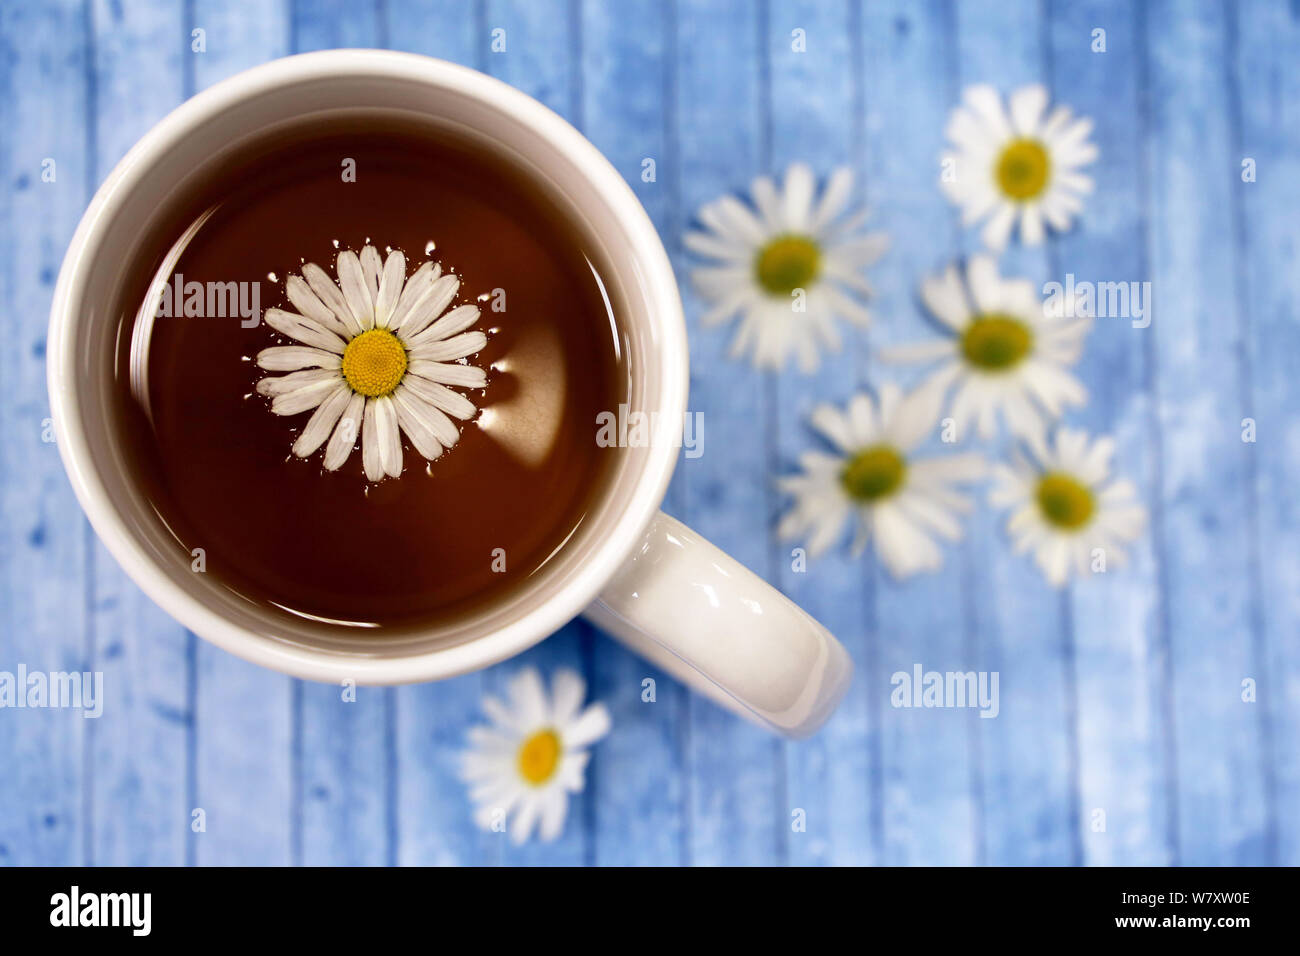 Chamomile tea in a white cup and daisy flowers on a blue wooden table, healing herbal drink Stock Photo